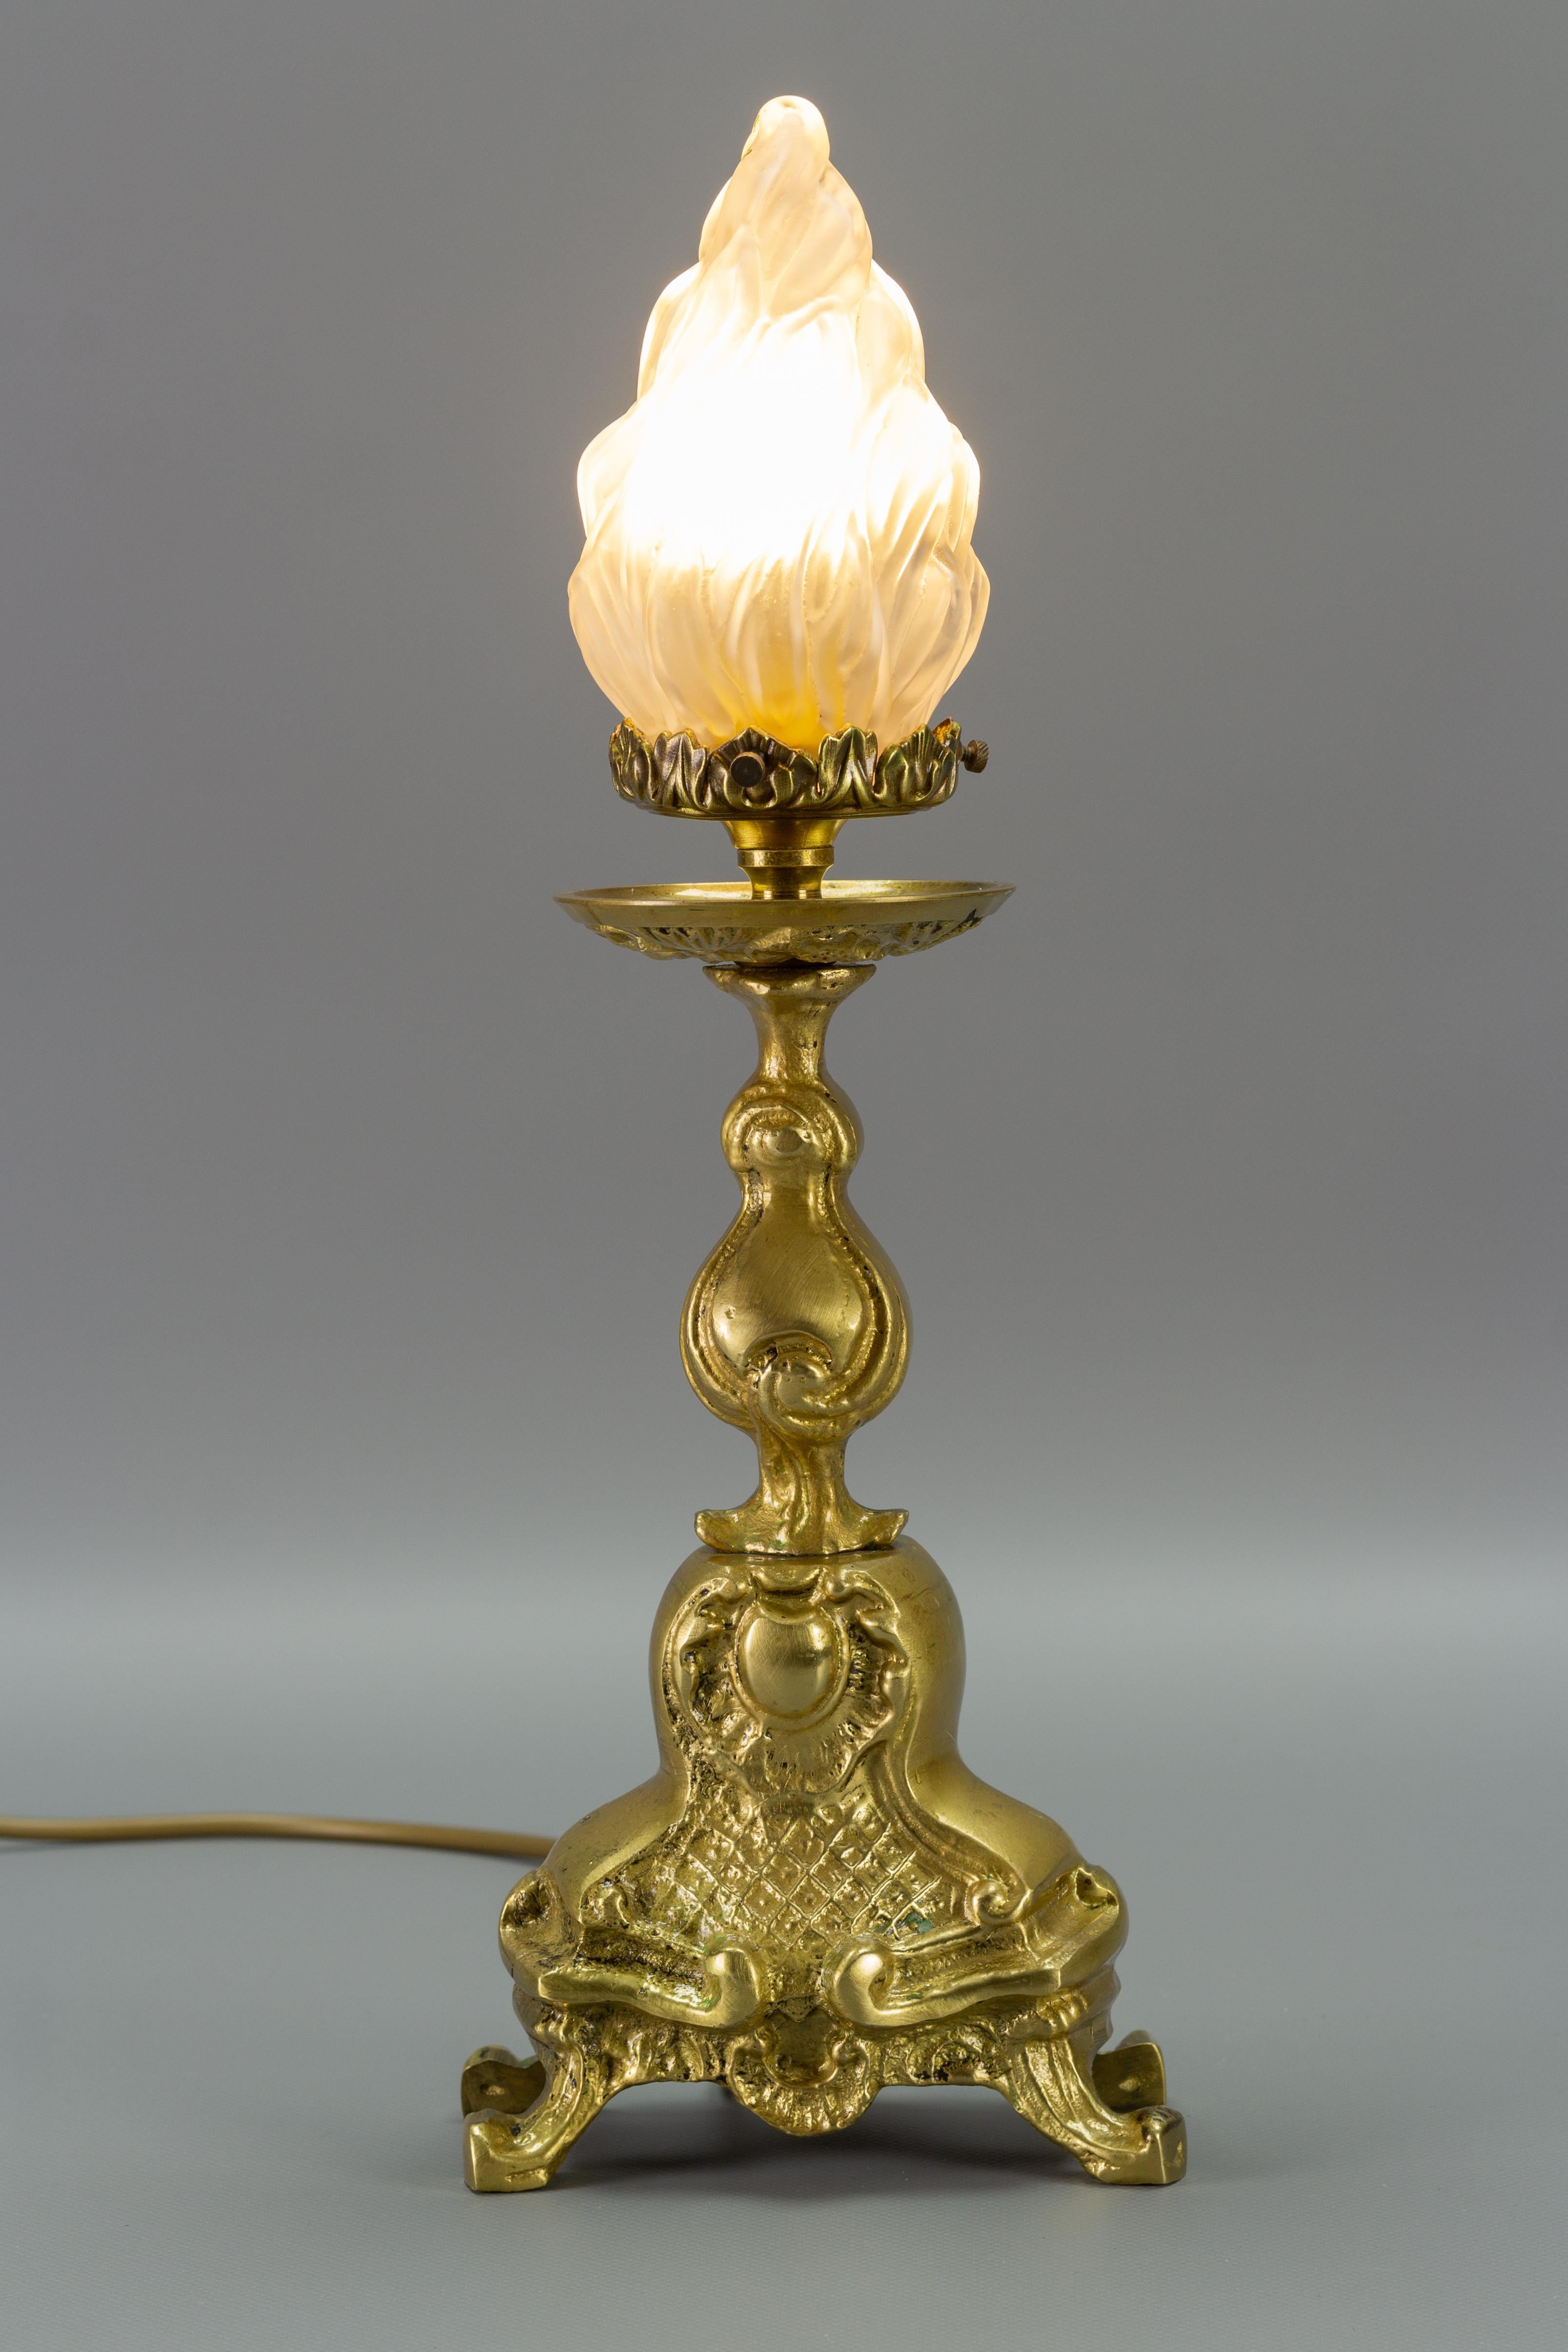 French Rococo-style bronze table lamp with frosted glass flame-shaped lampshade. 
One socket for the E14 size light bulb.
To the US will be shipped with an adapter for the US wiring system.
Dimensions: Height 38 cm / 14.96 in, width 13 cm / 5.11 in,